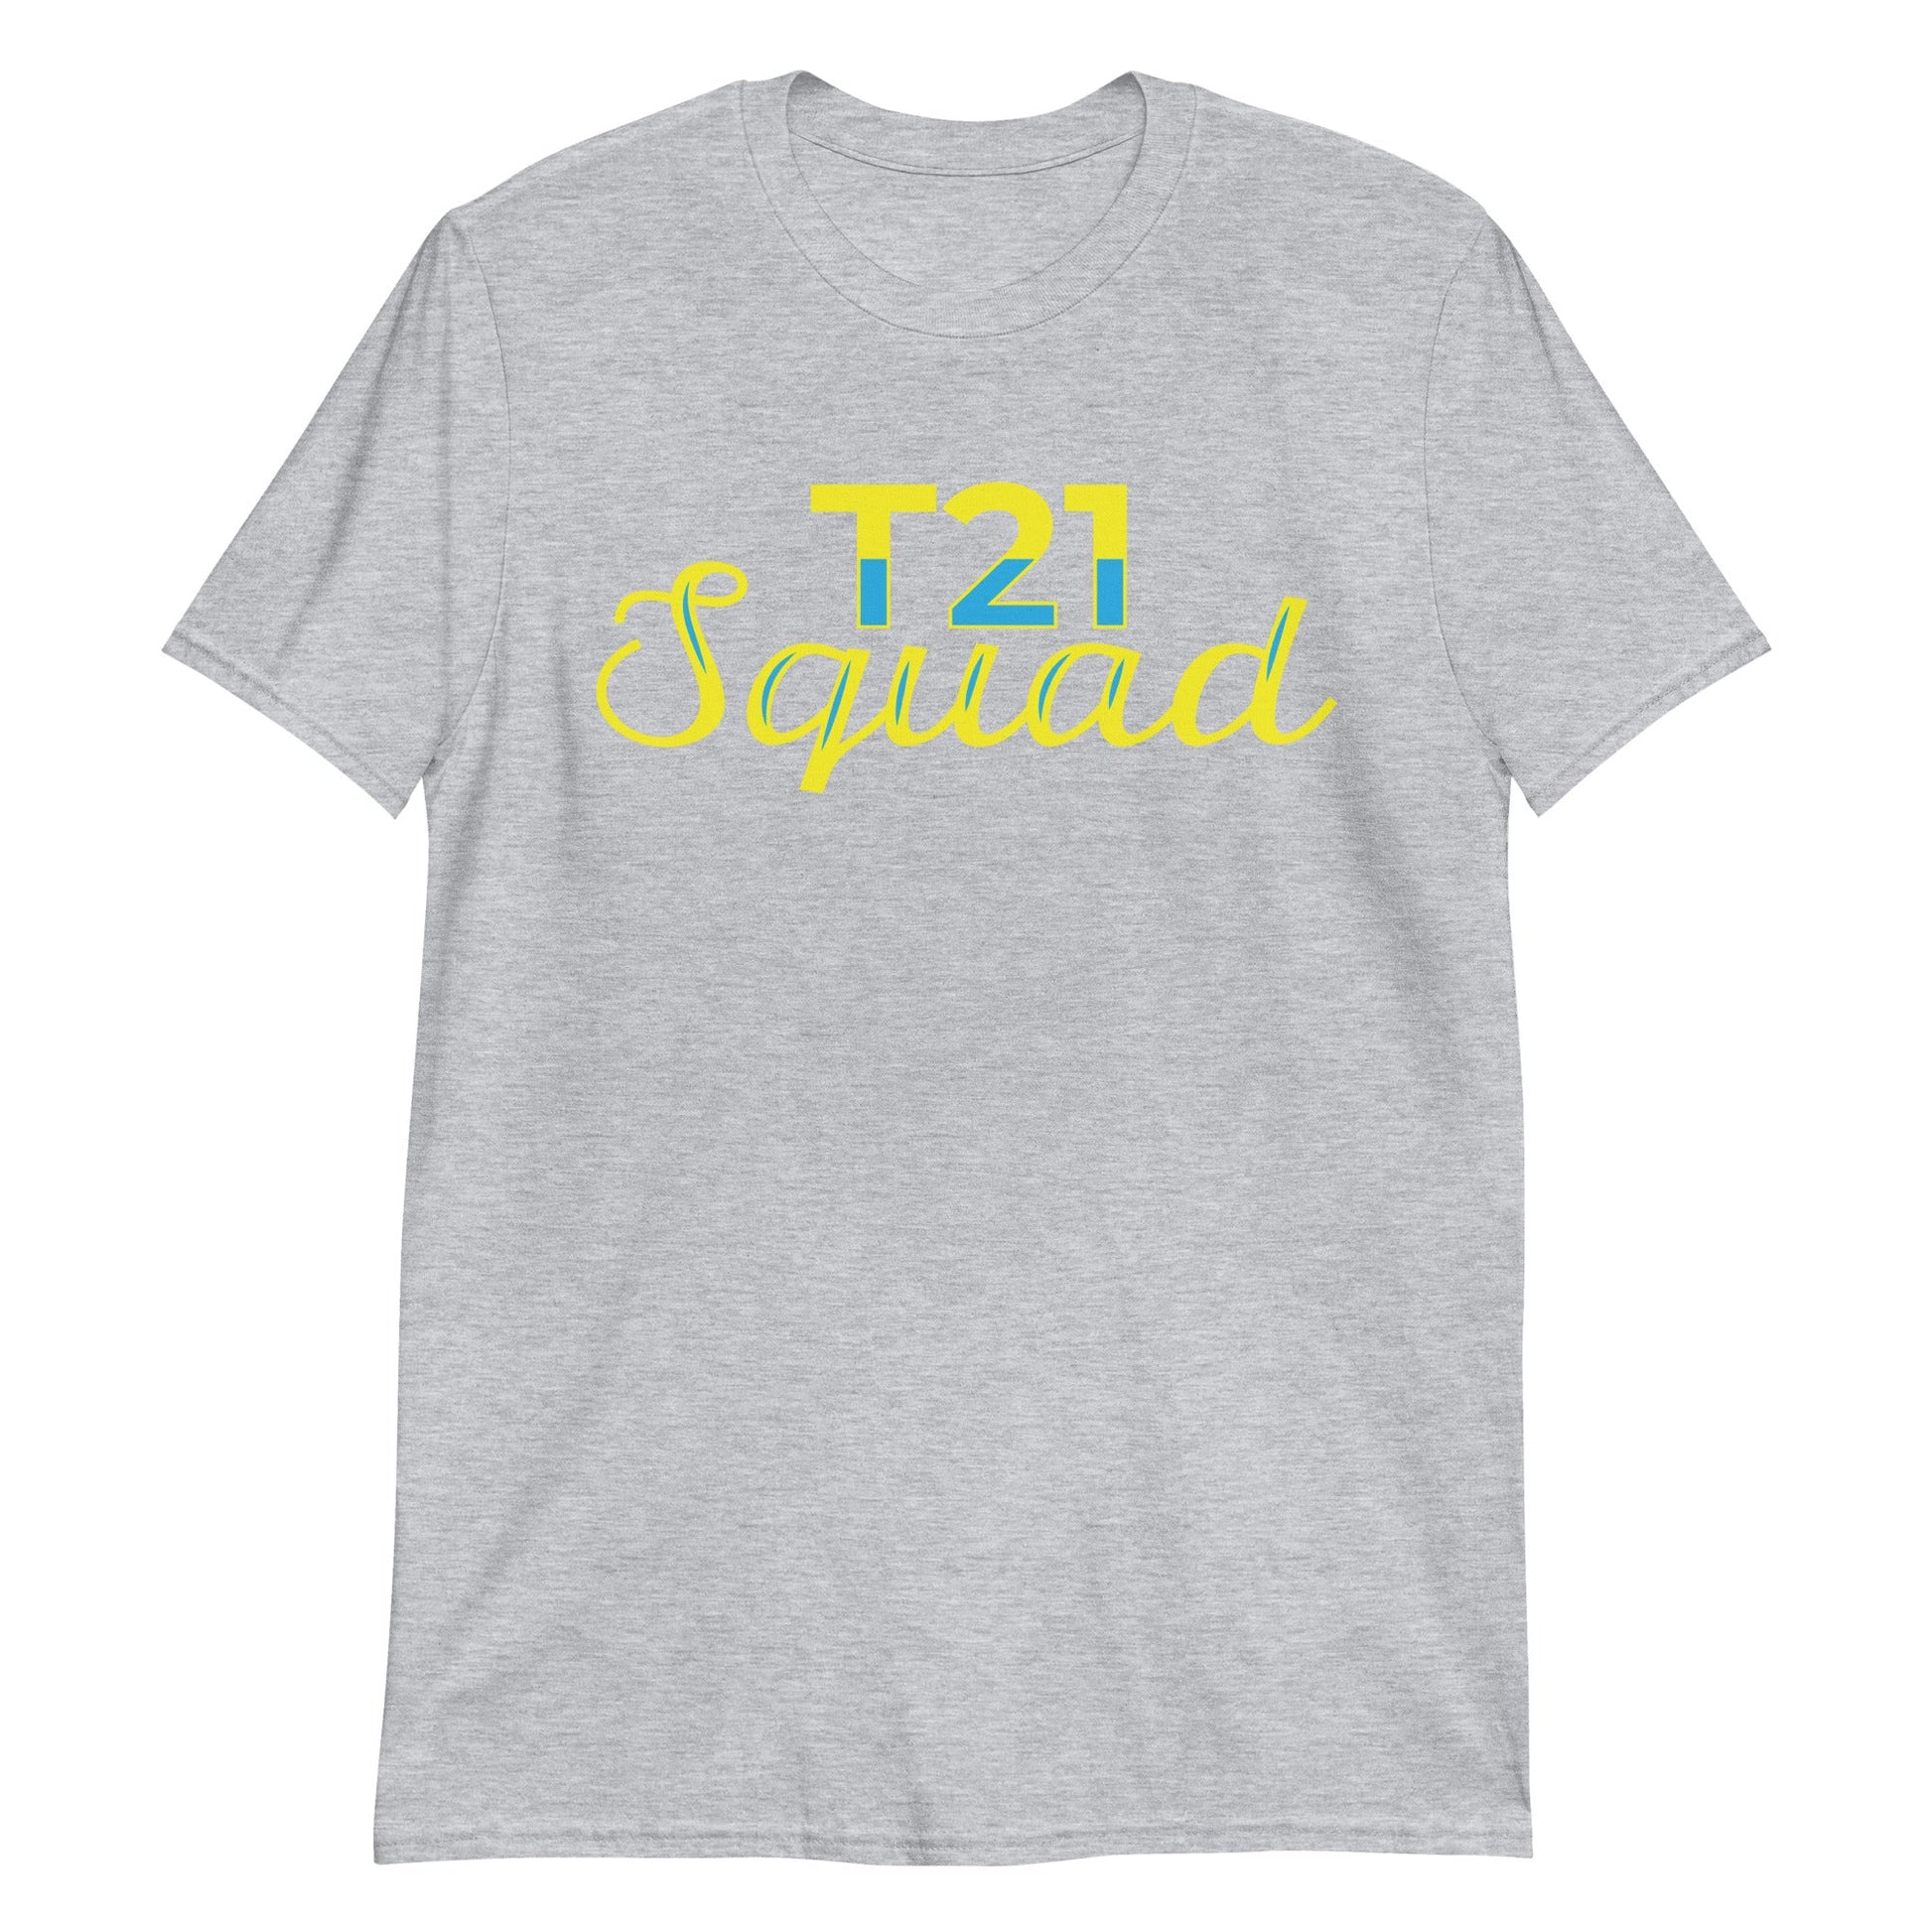 T21 Squad Short-Sleeve Unisex T-Shirt - Uniquely Included